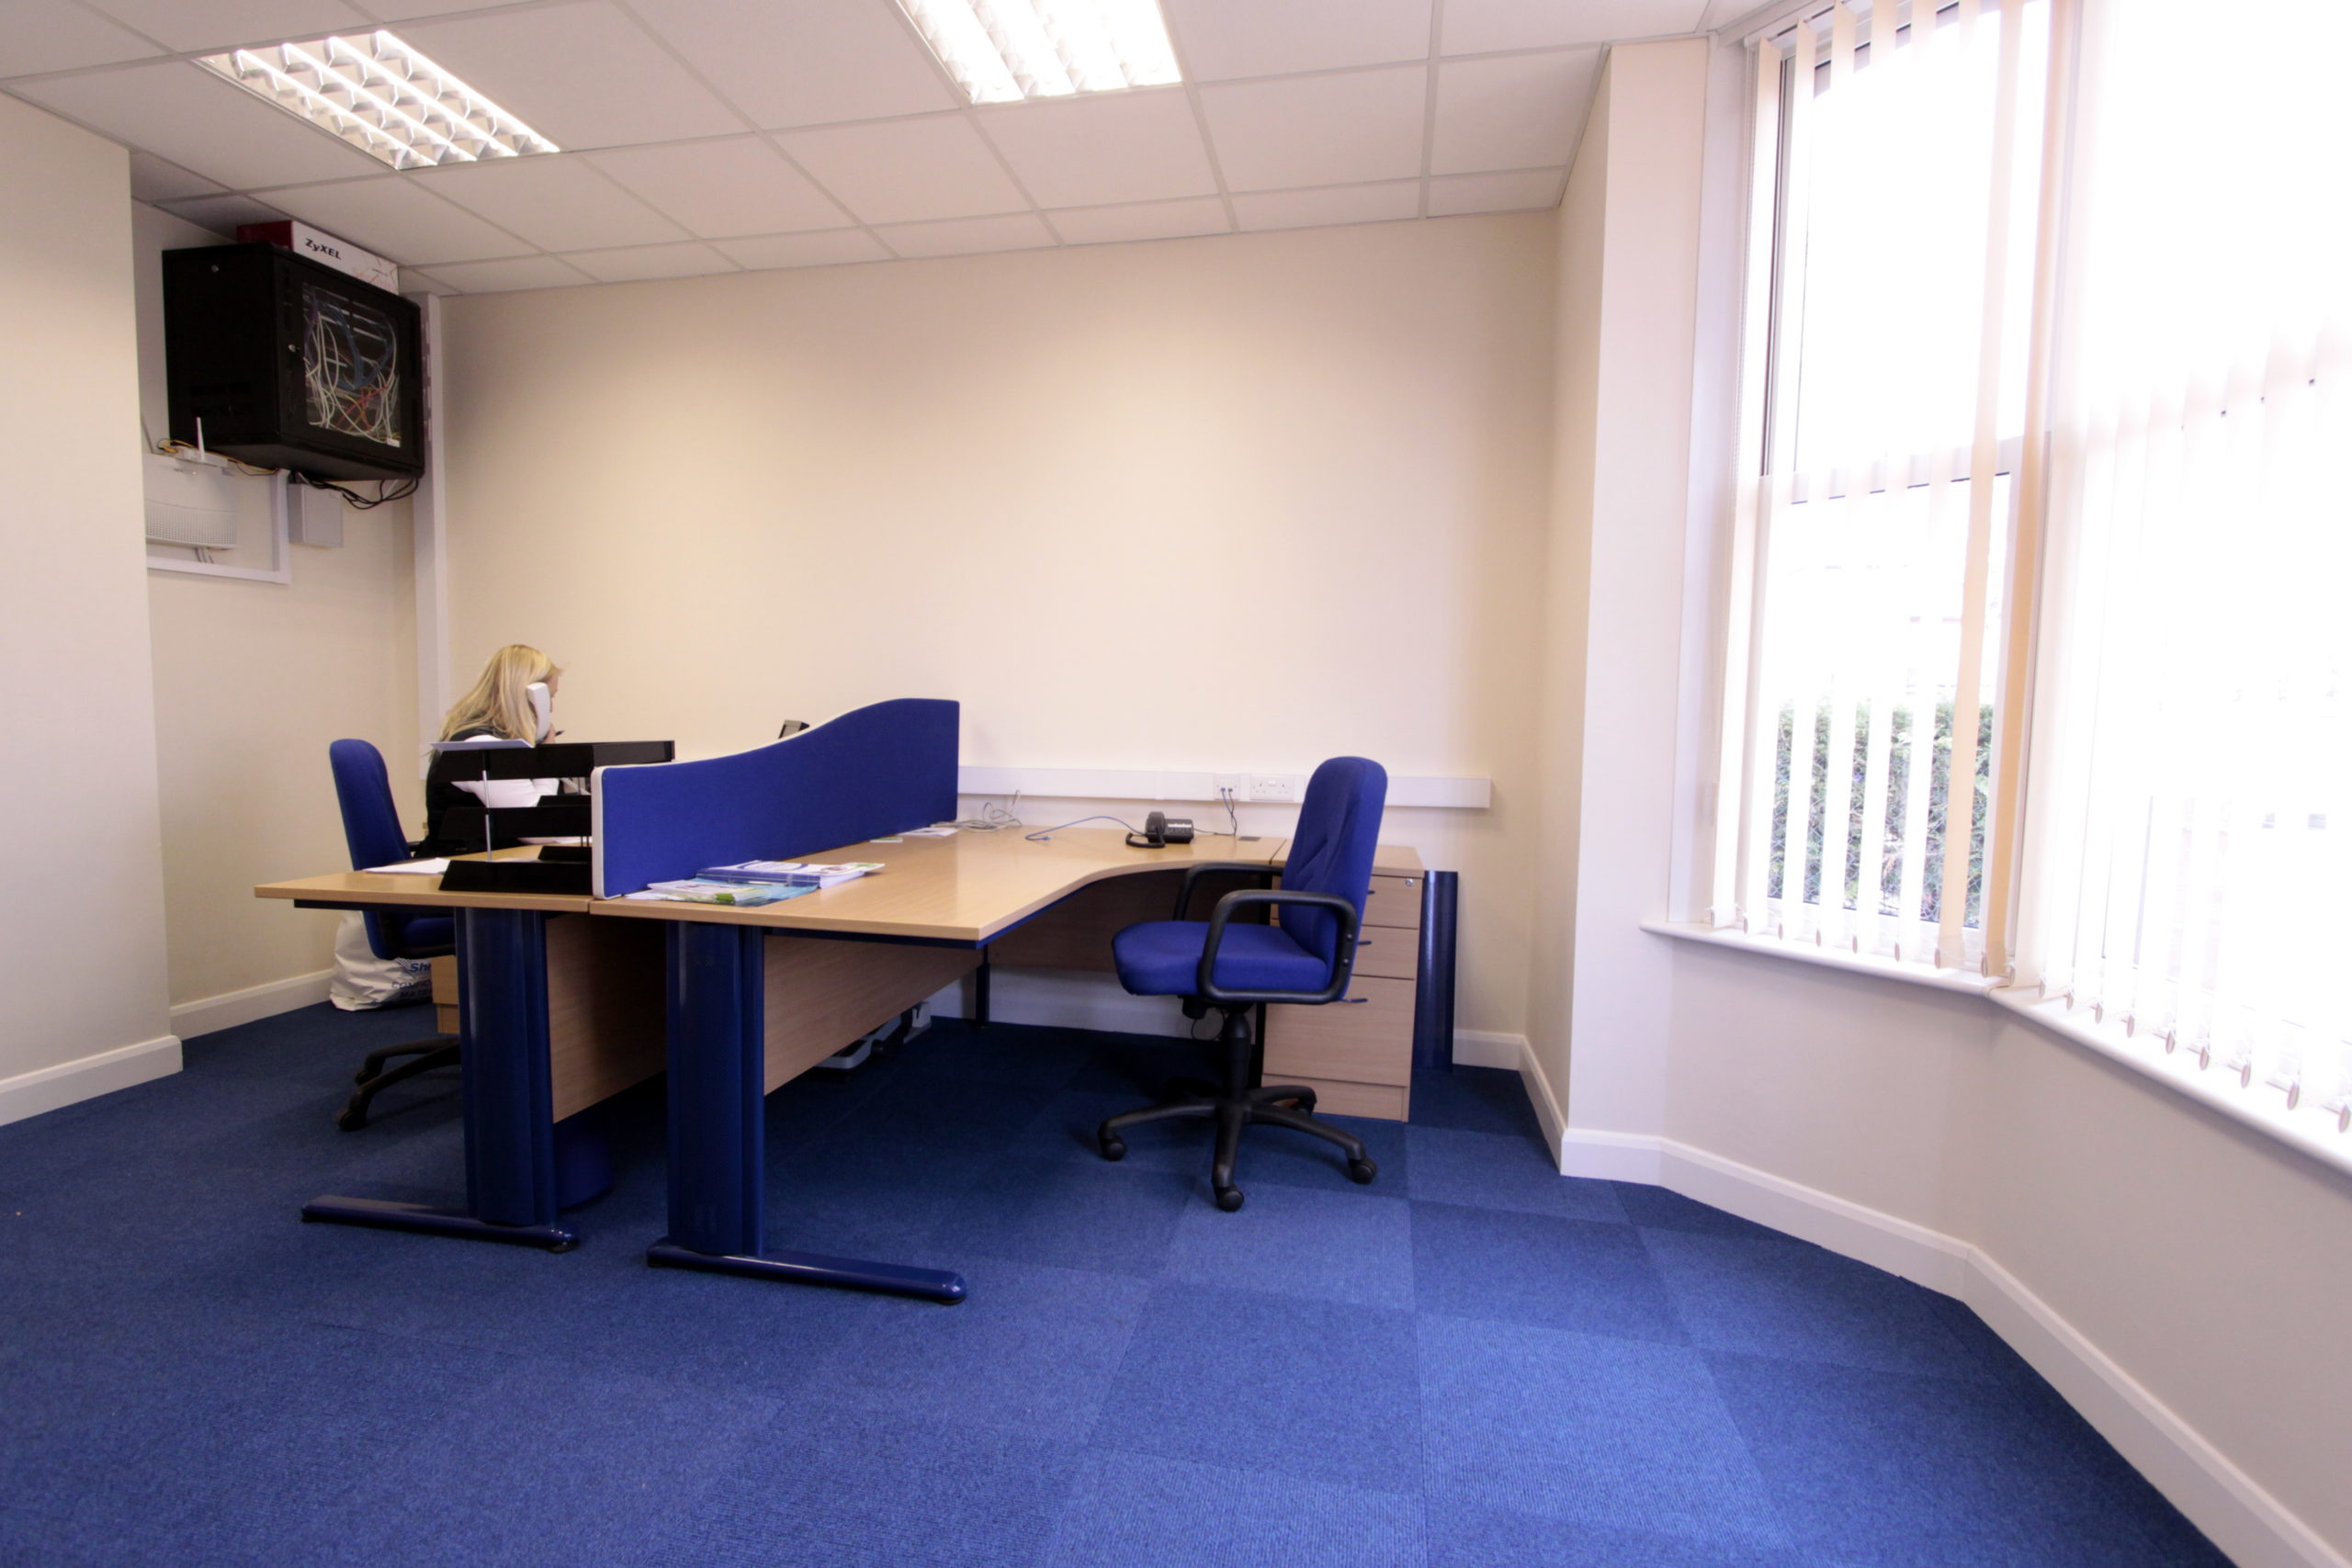 A blue carpet in the office located at 64 St Peters Avenue in Cleethorpes.